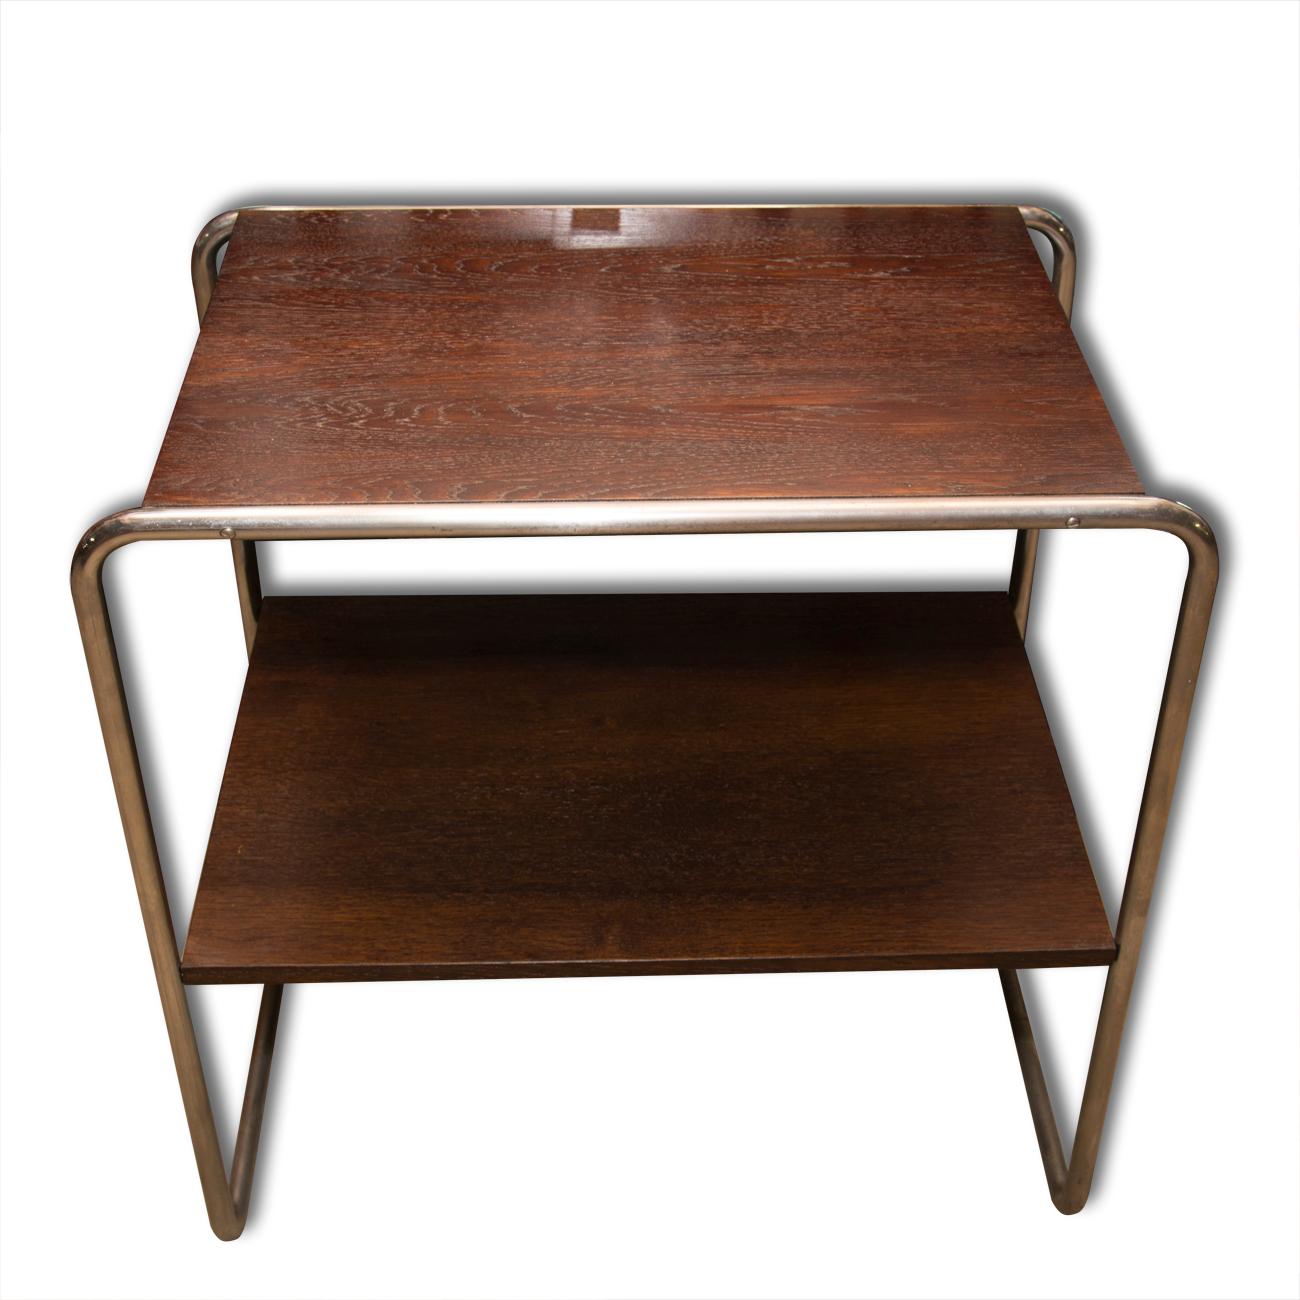 A chromium-plated side table designed by Marcel Breuer, Bauhaus period, 1930s, made in Bohemia. It features a chromium-plated base metal and wooden boards. The table is after refurbish using shellac polish. In excellent condition.

 